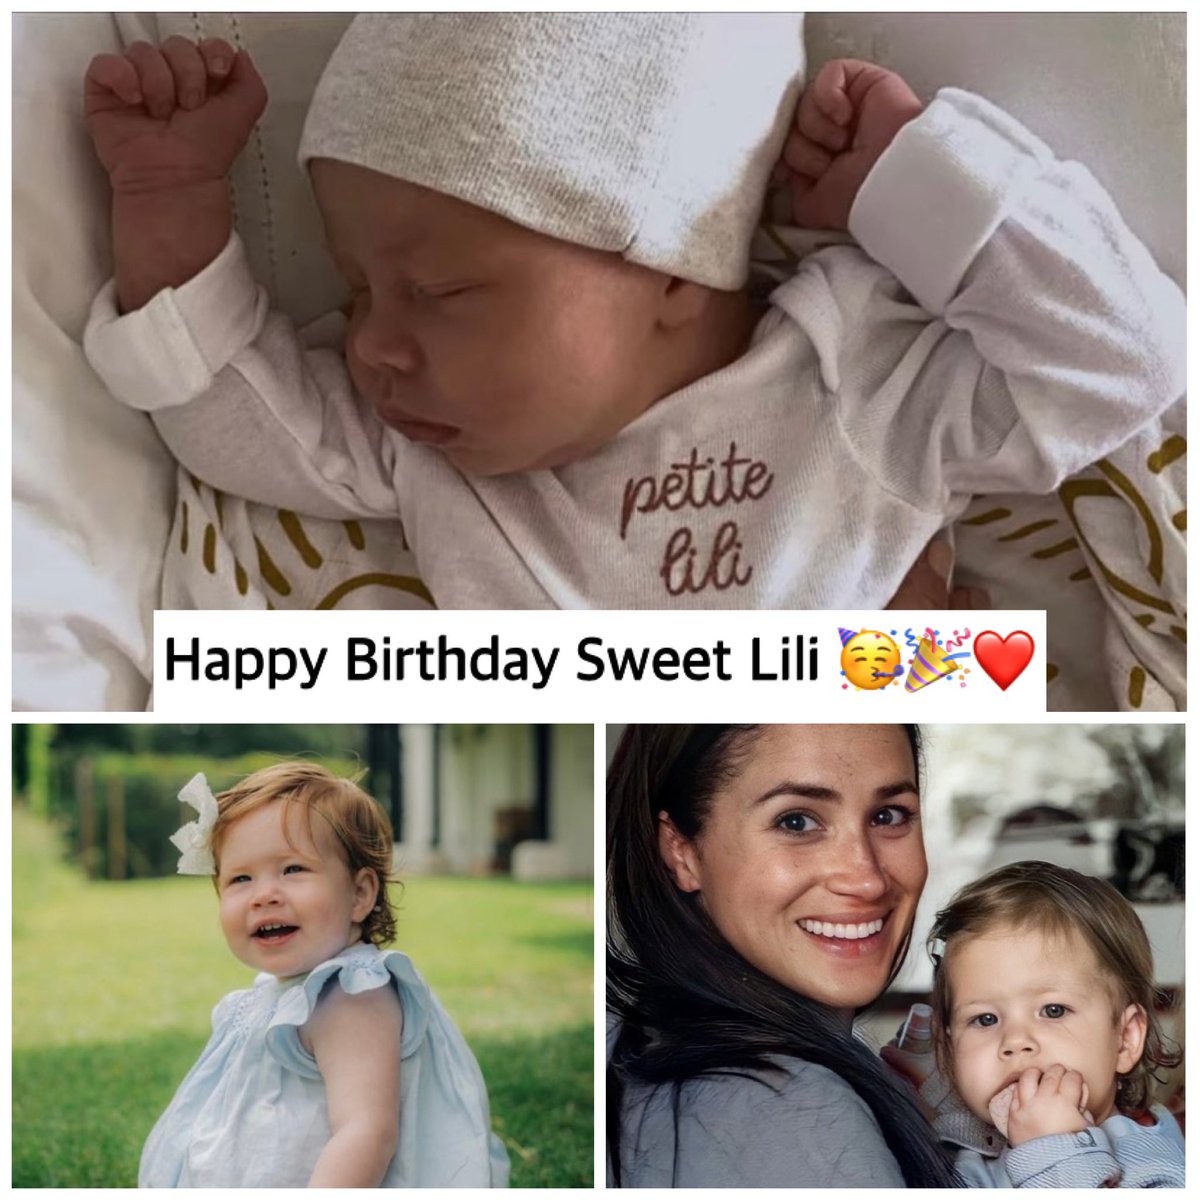 Just made my 2nd donation in honour of this gorgeous little munchkin🥰. Happy Birthday Princess Lili🥳🎉❤️. #PrincessLilibetBirthday2 #PrinceArchie4  #KABOOM #WeLoveYouHarryandMeghan